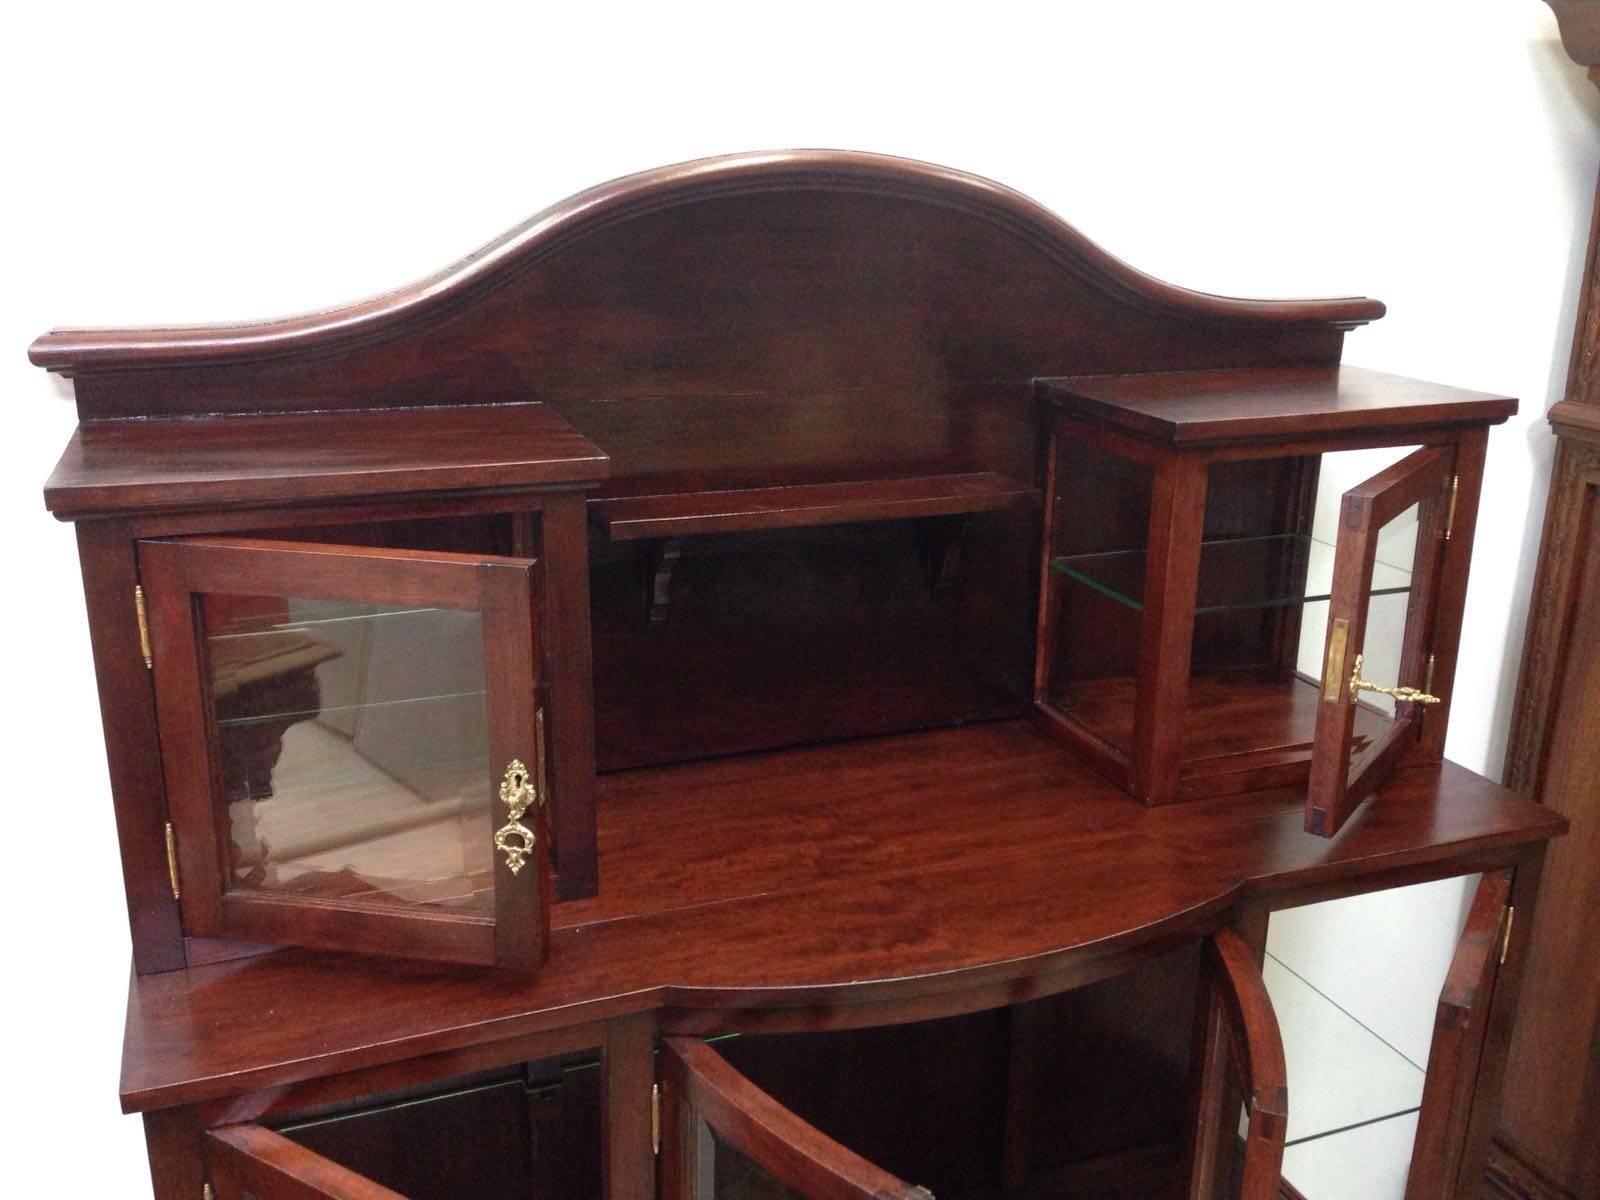 Modernist Mahogany Grand Buffet with Crest In Excellent Condition For Sale In Miami, FL